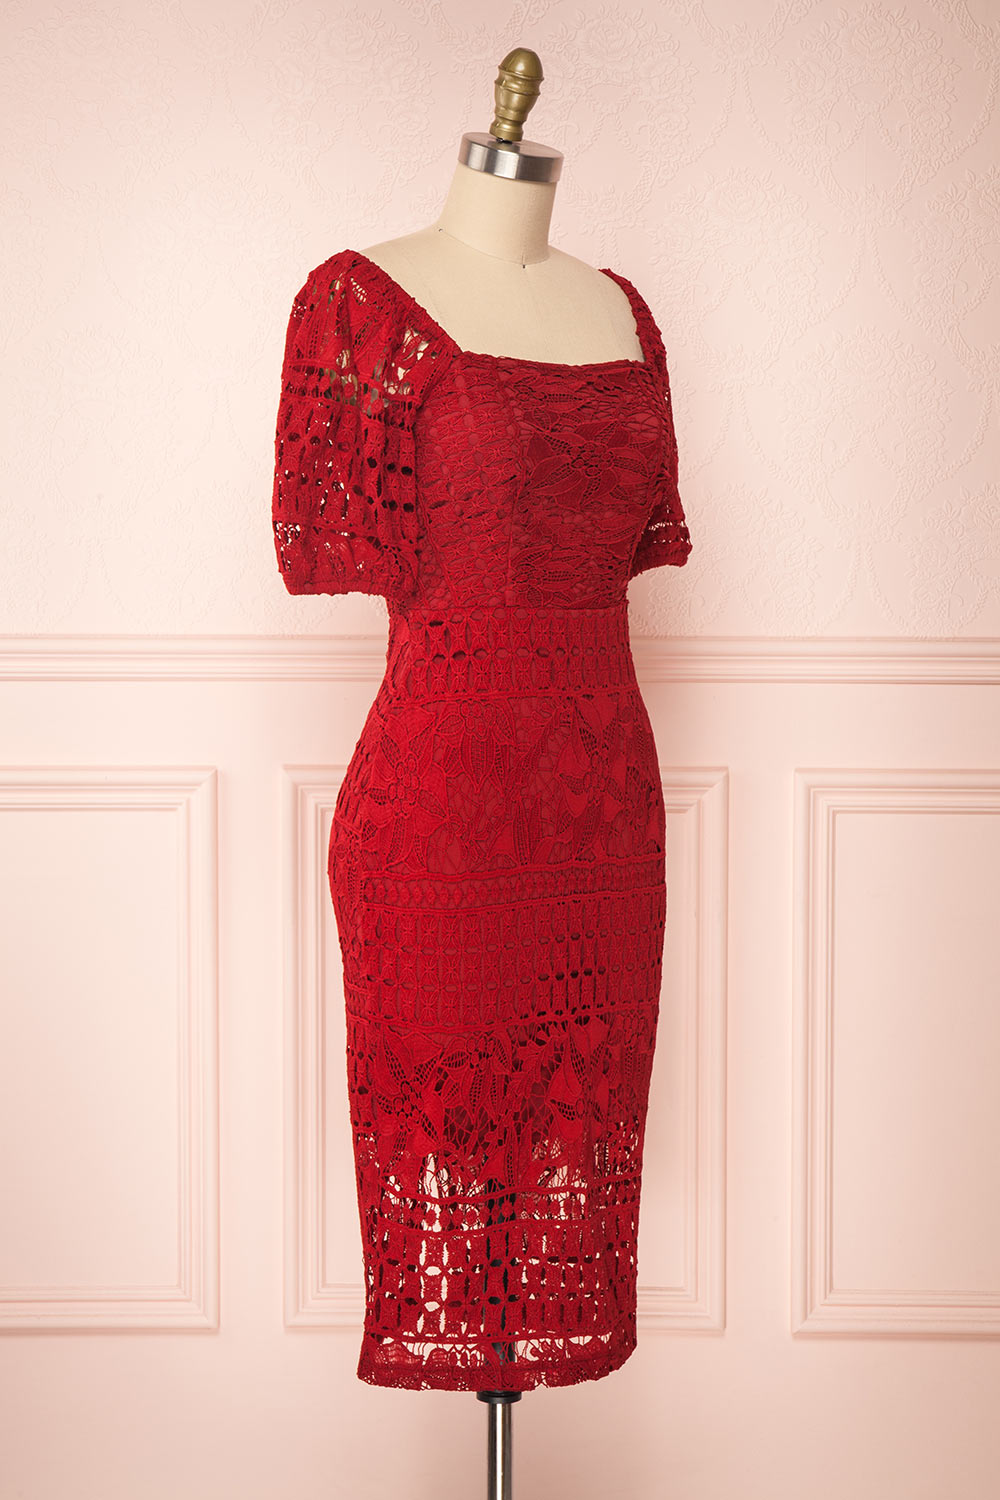 Daphnee Rouge Red Lace Fitted Cocktail Dress | Boutique 1861 side view 